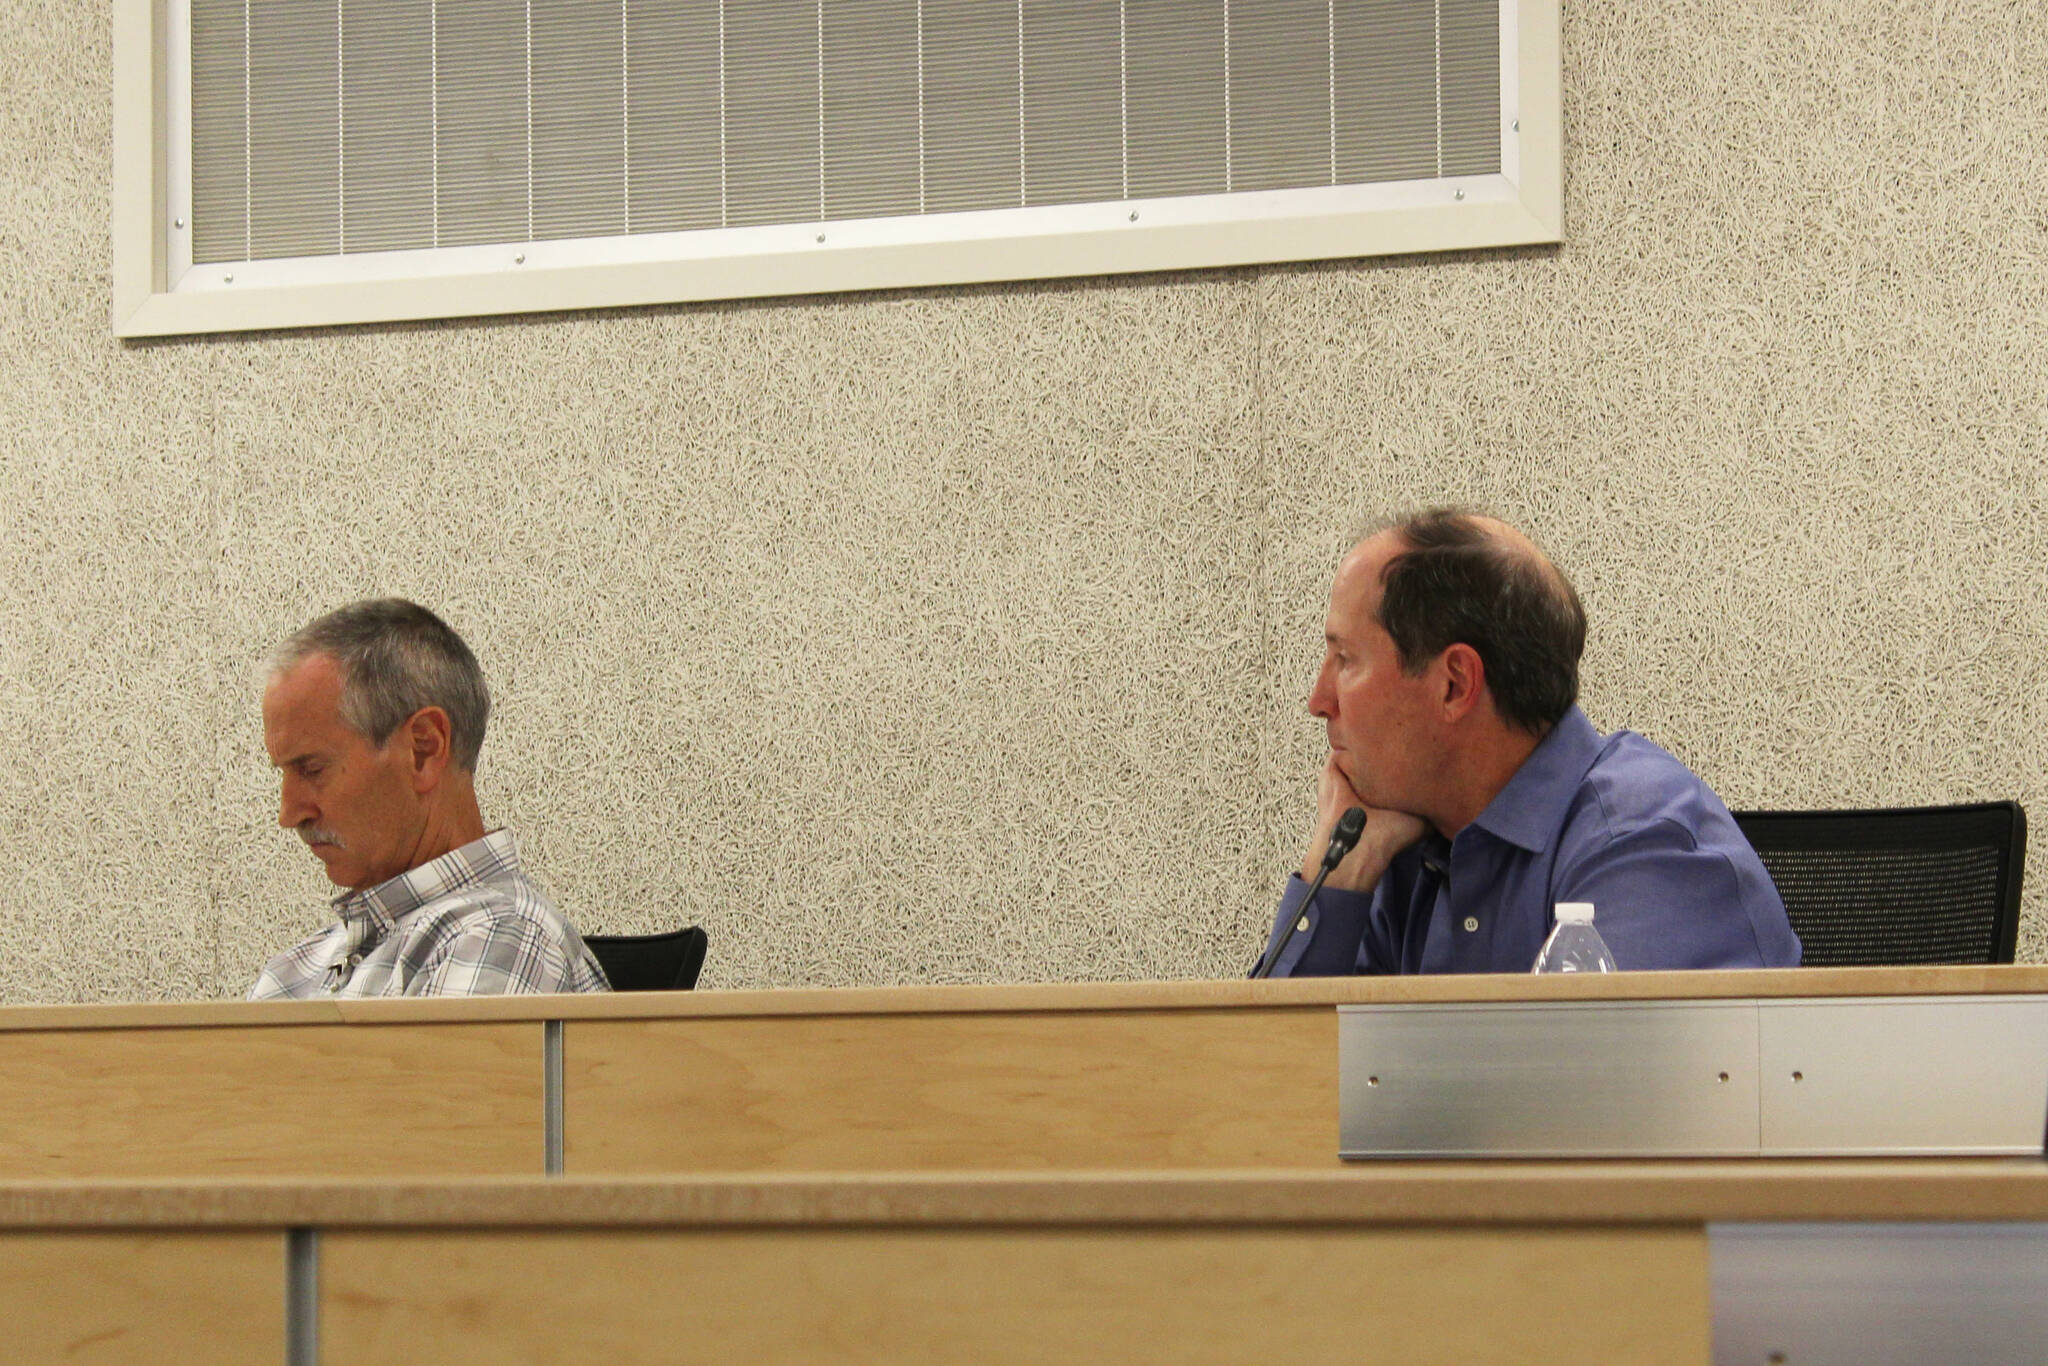 Ashlyn O’Hara/Peninsula Clarion
Kenai Peninsula Borough Mayor Mike Navarre, right, and his chief of staff, Max Best, participate in an assembly meeting on Tuesday in Soldotna. The meeting was Navarre’s first as mayor since being appointed last month.